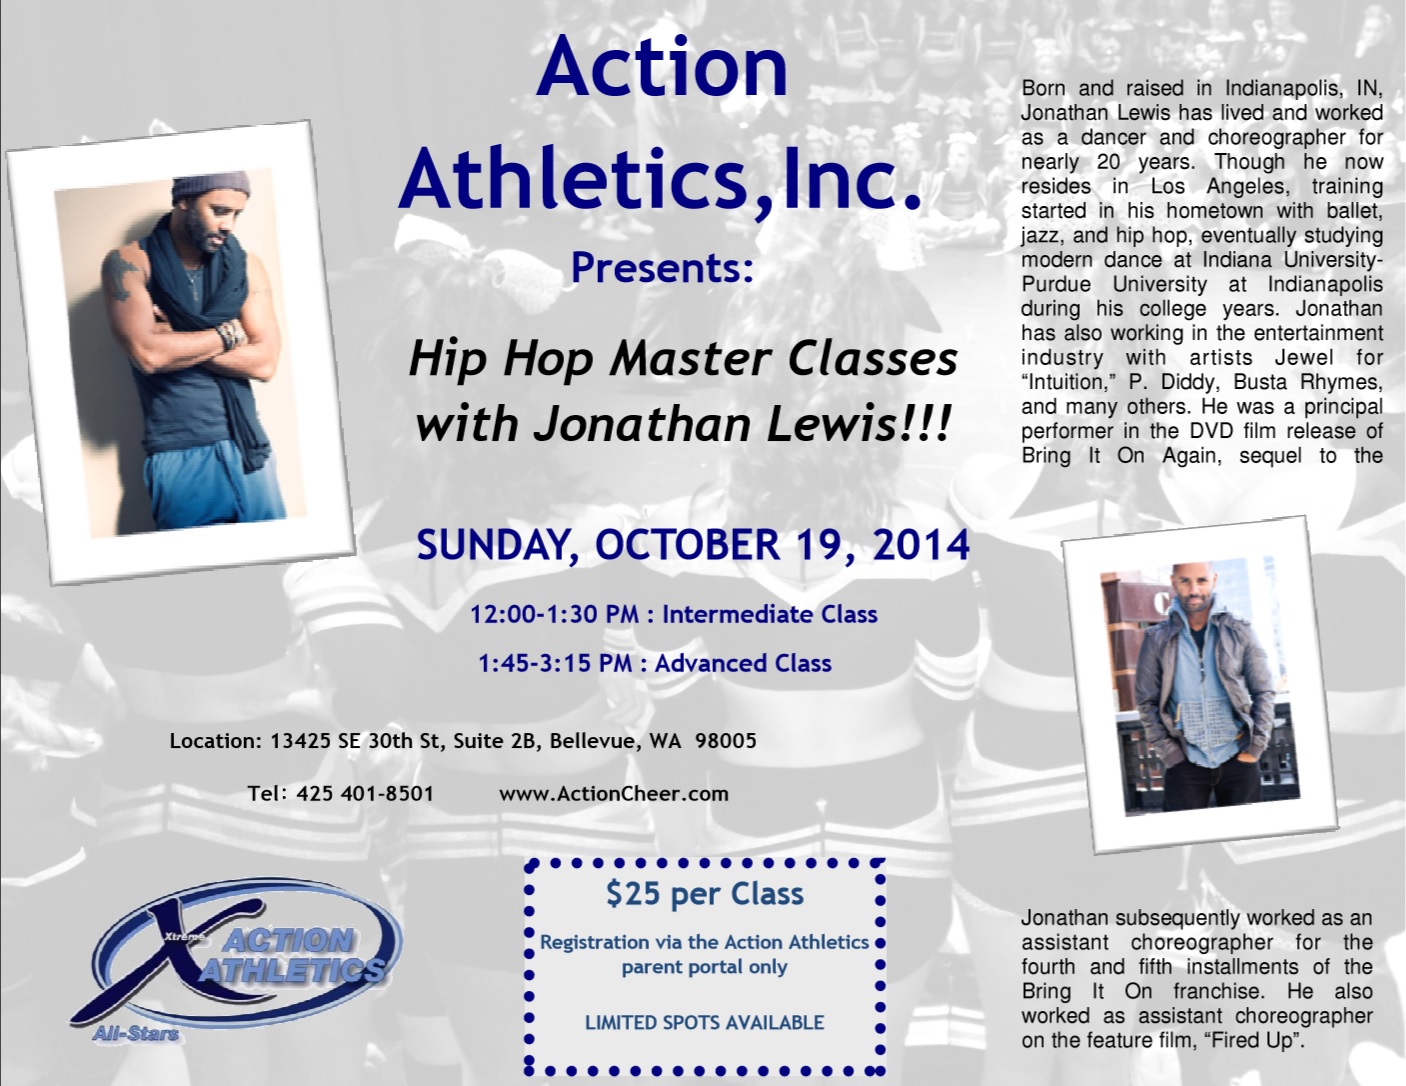 Hip Hop Master Classes with Jonathan Lewis, 2014